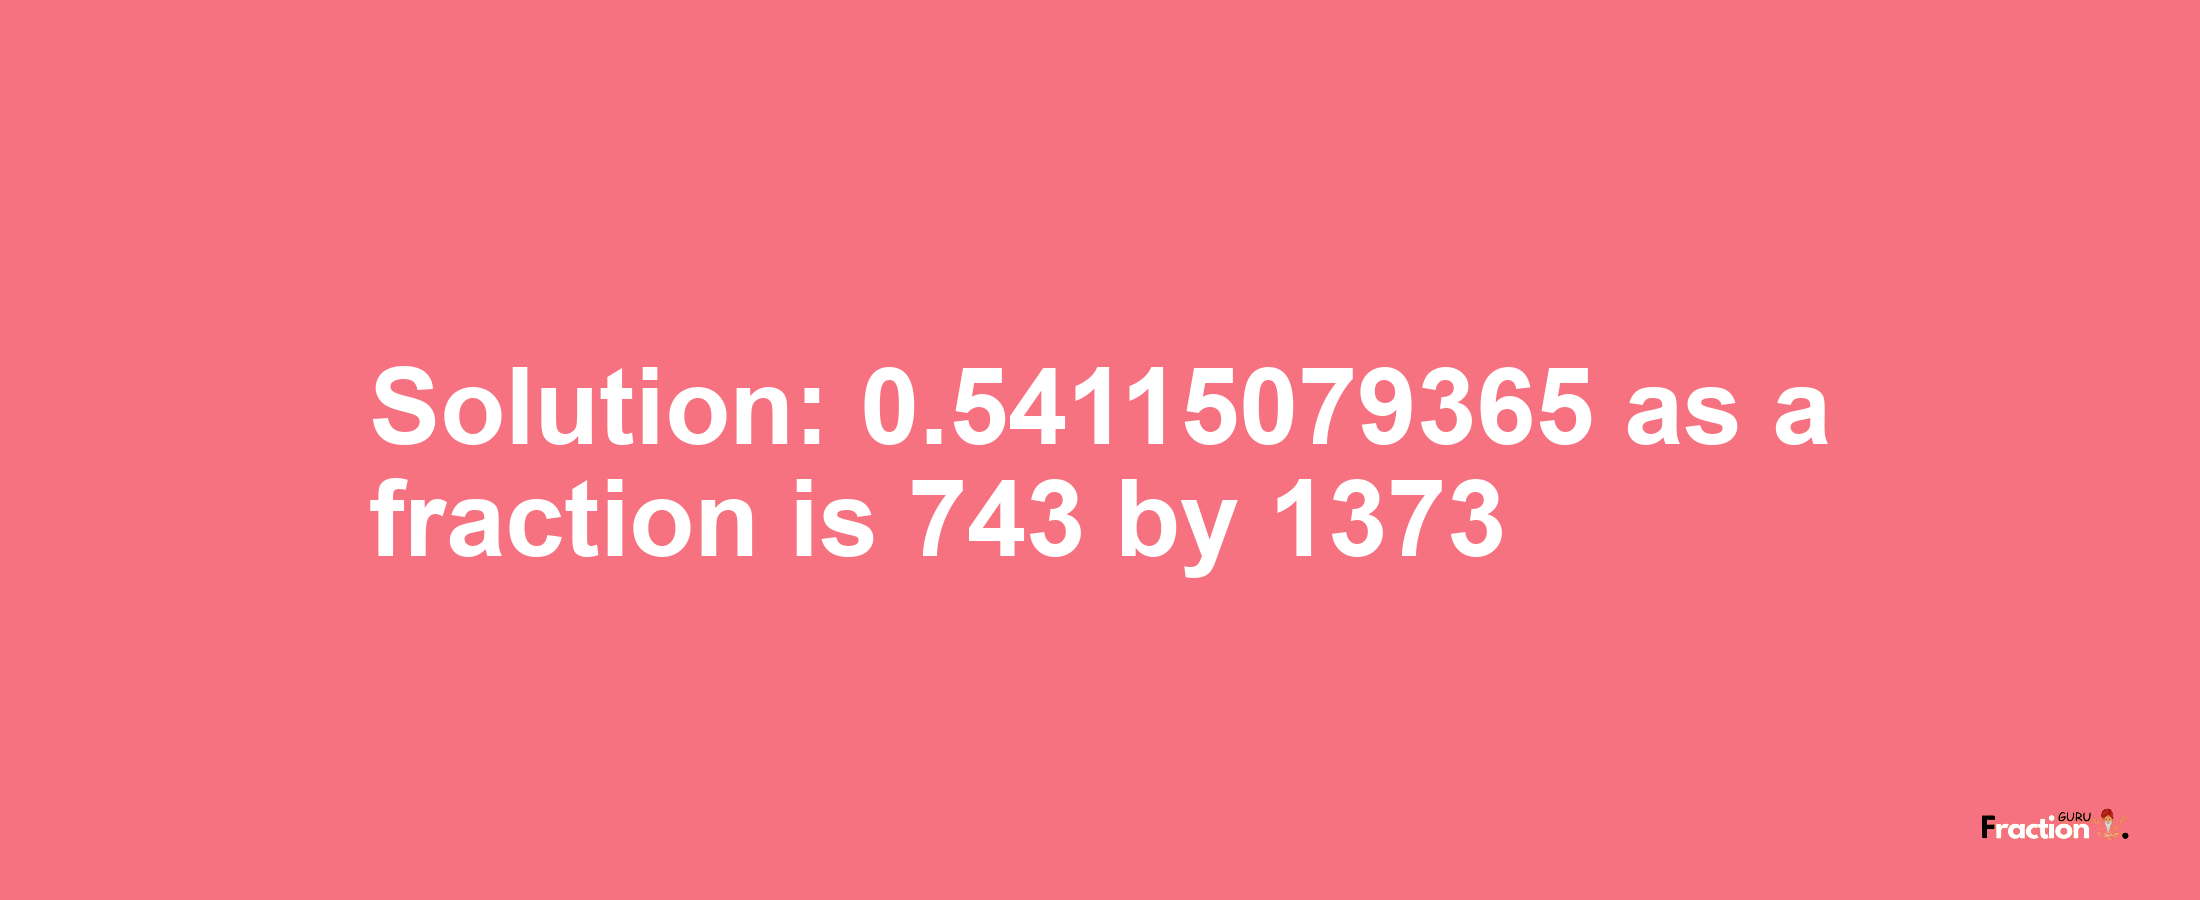 Solution:0.54115079365 as a fraction is 743/1373